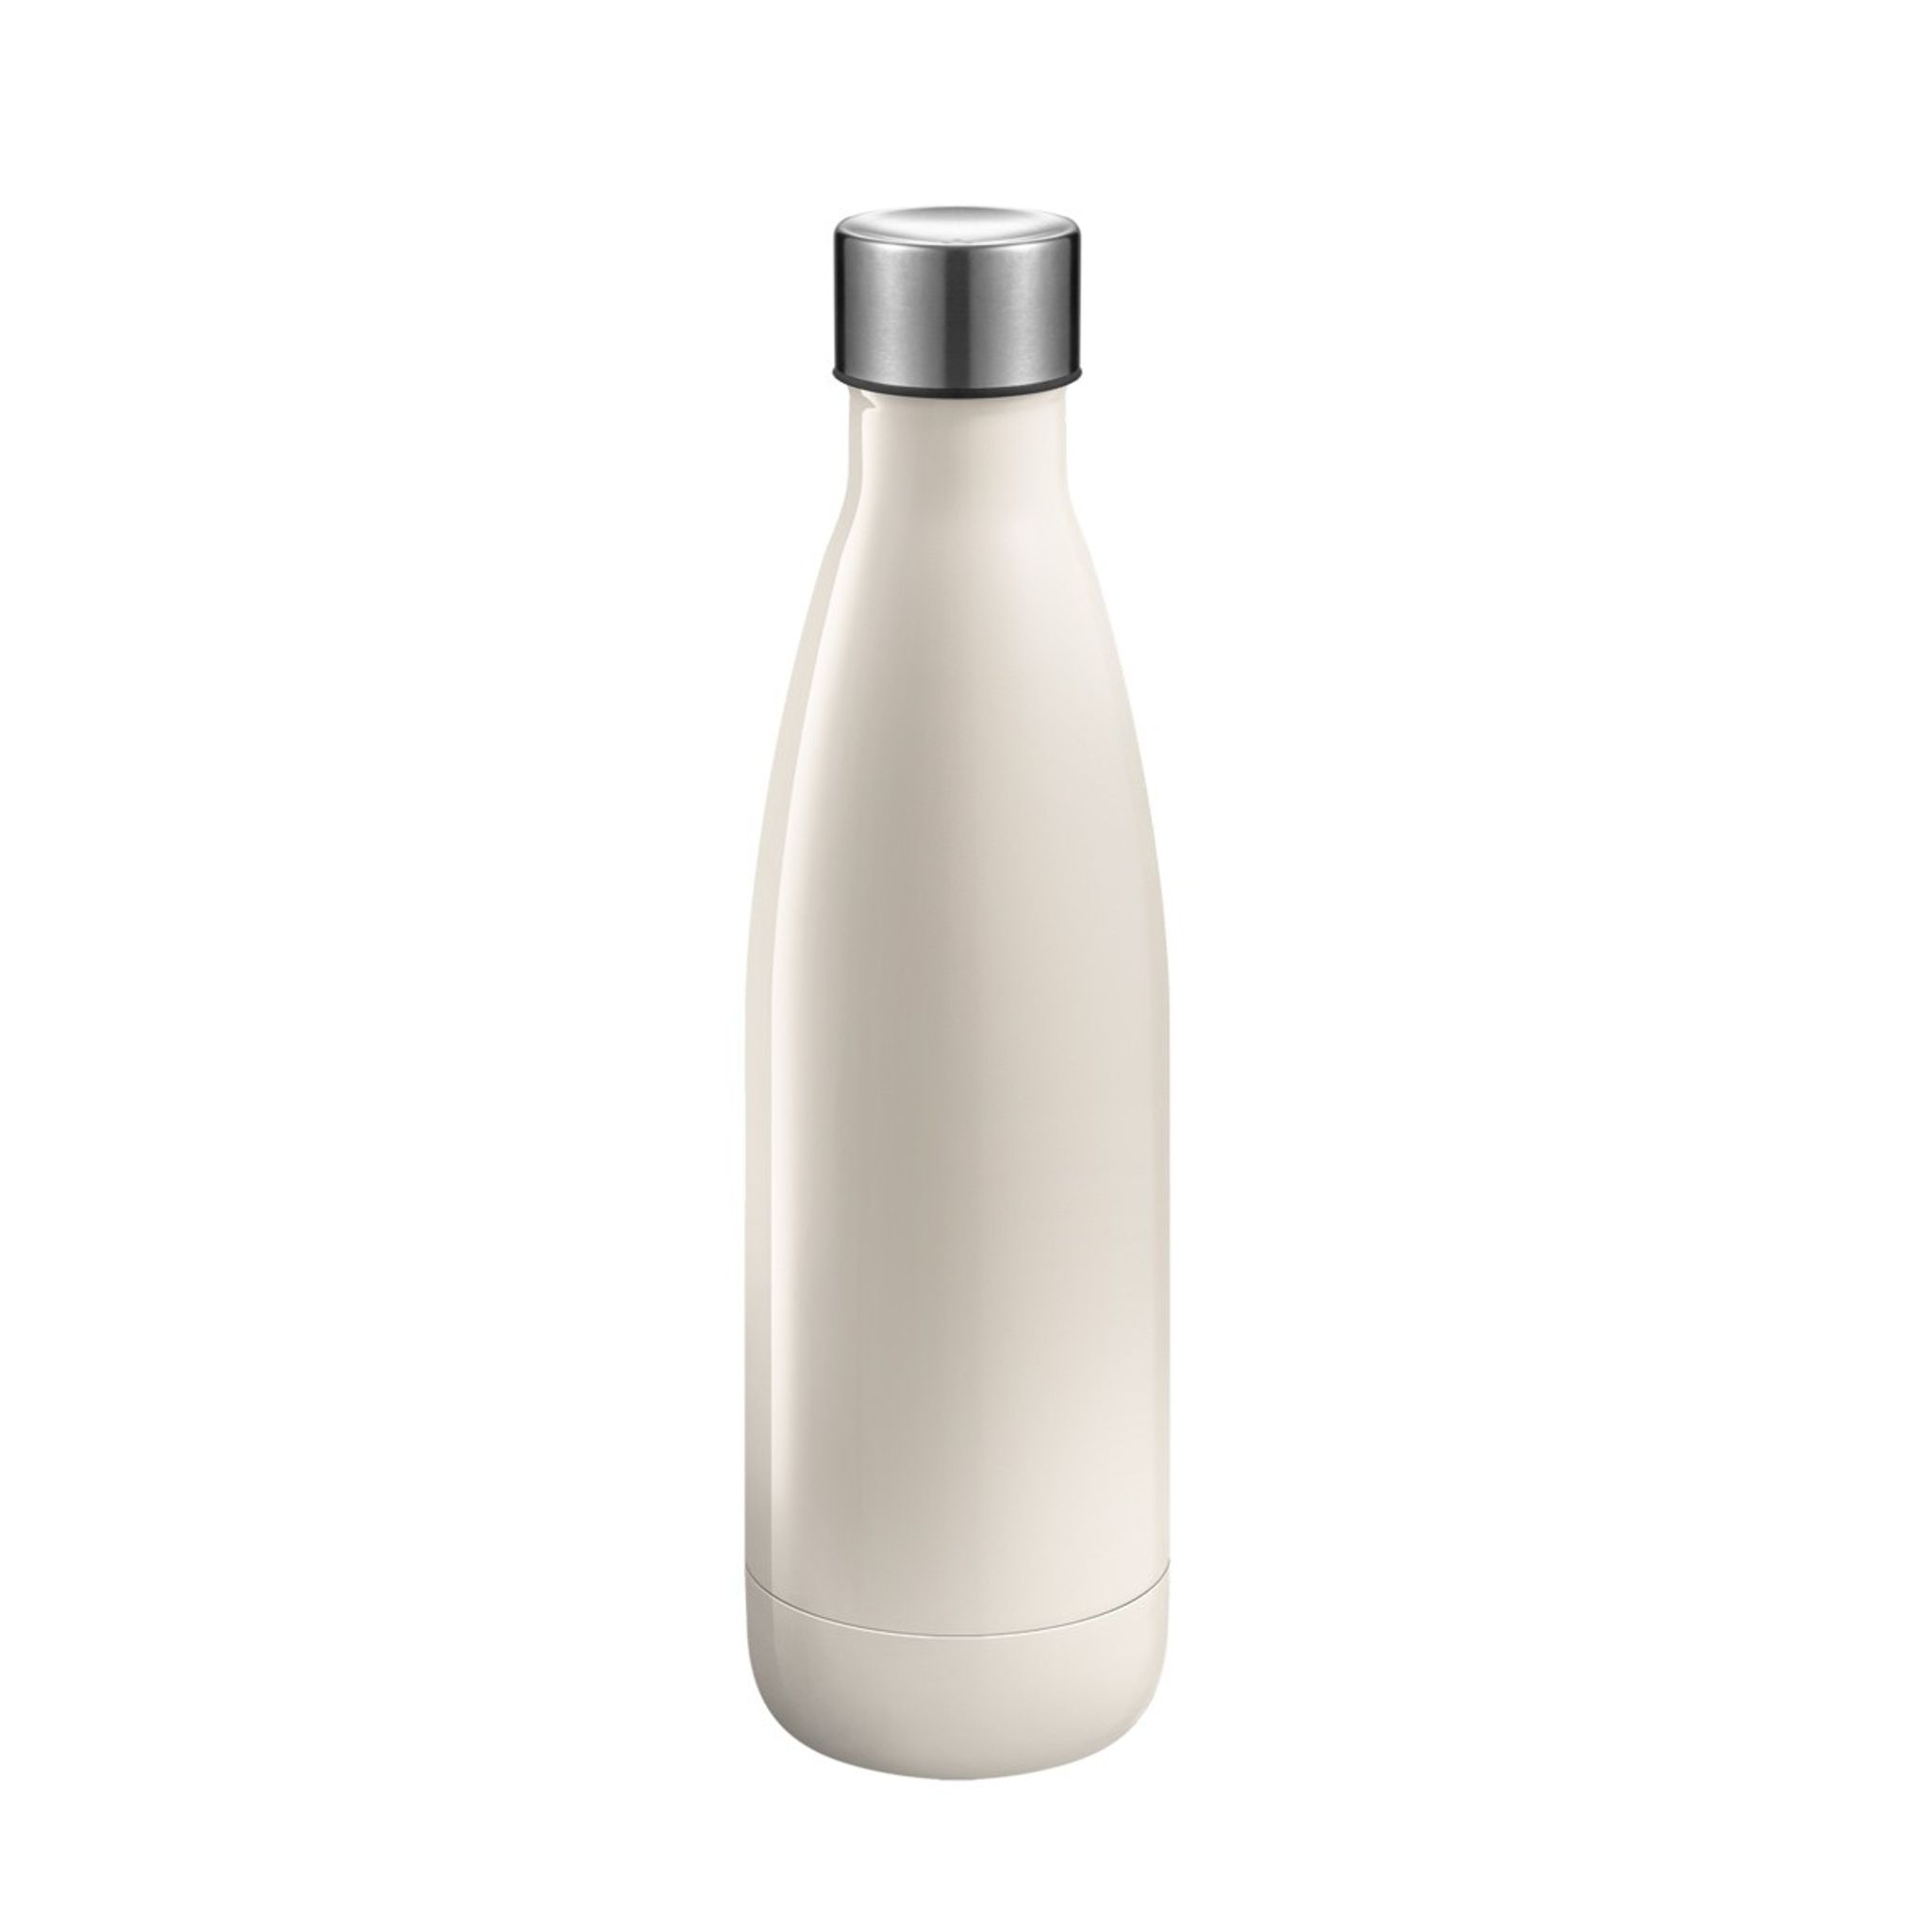 Bottle CONSTANT PASTEL 0.6 l, stainless steel, grey